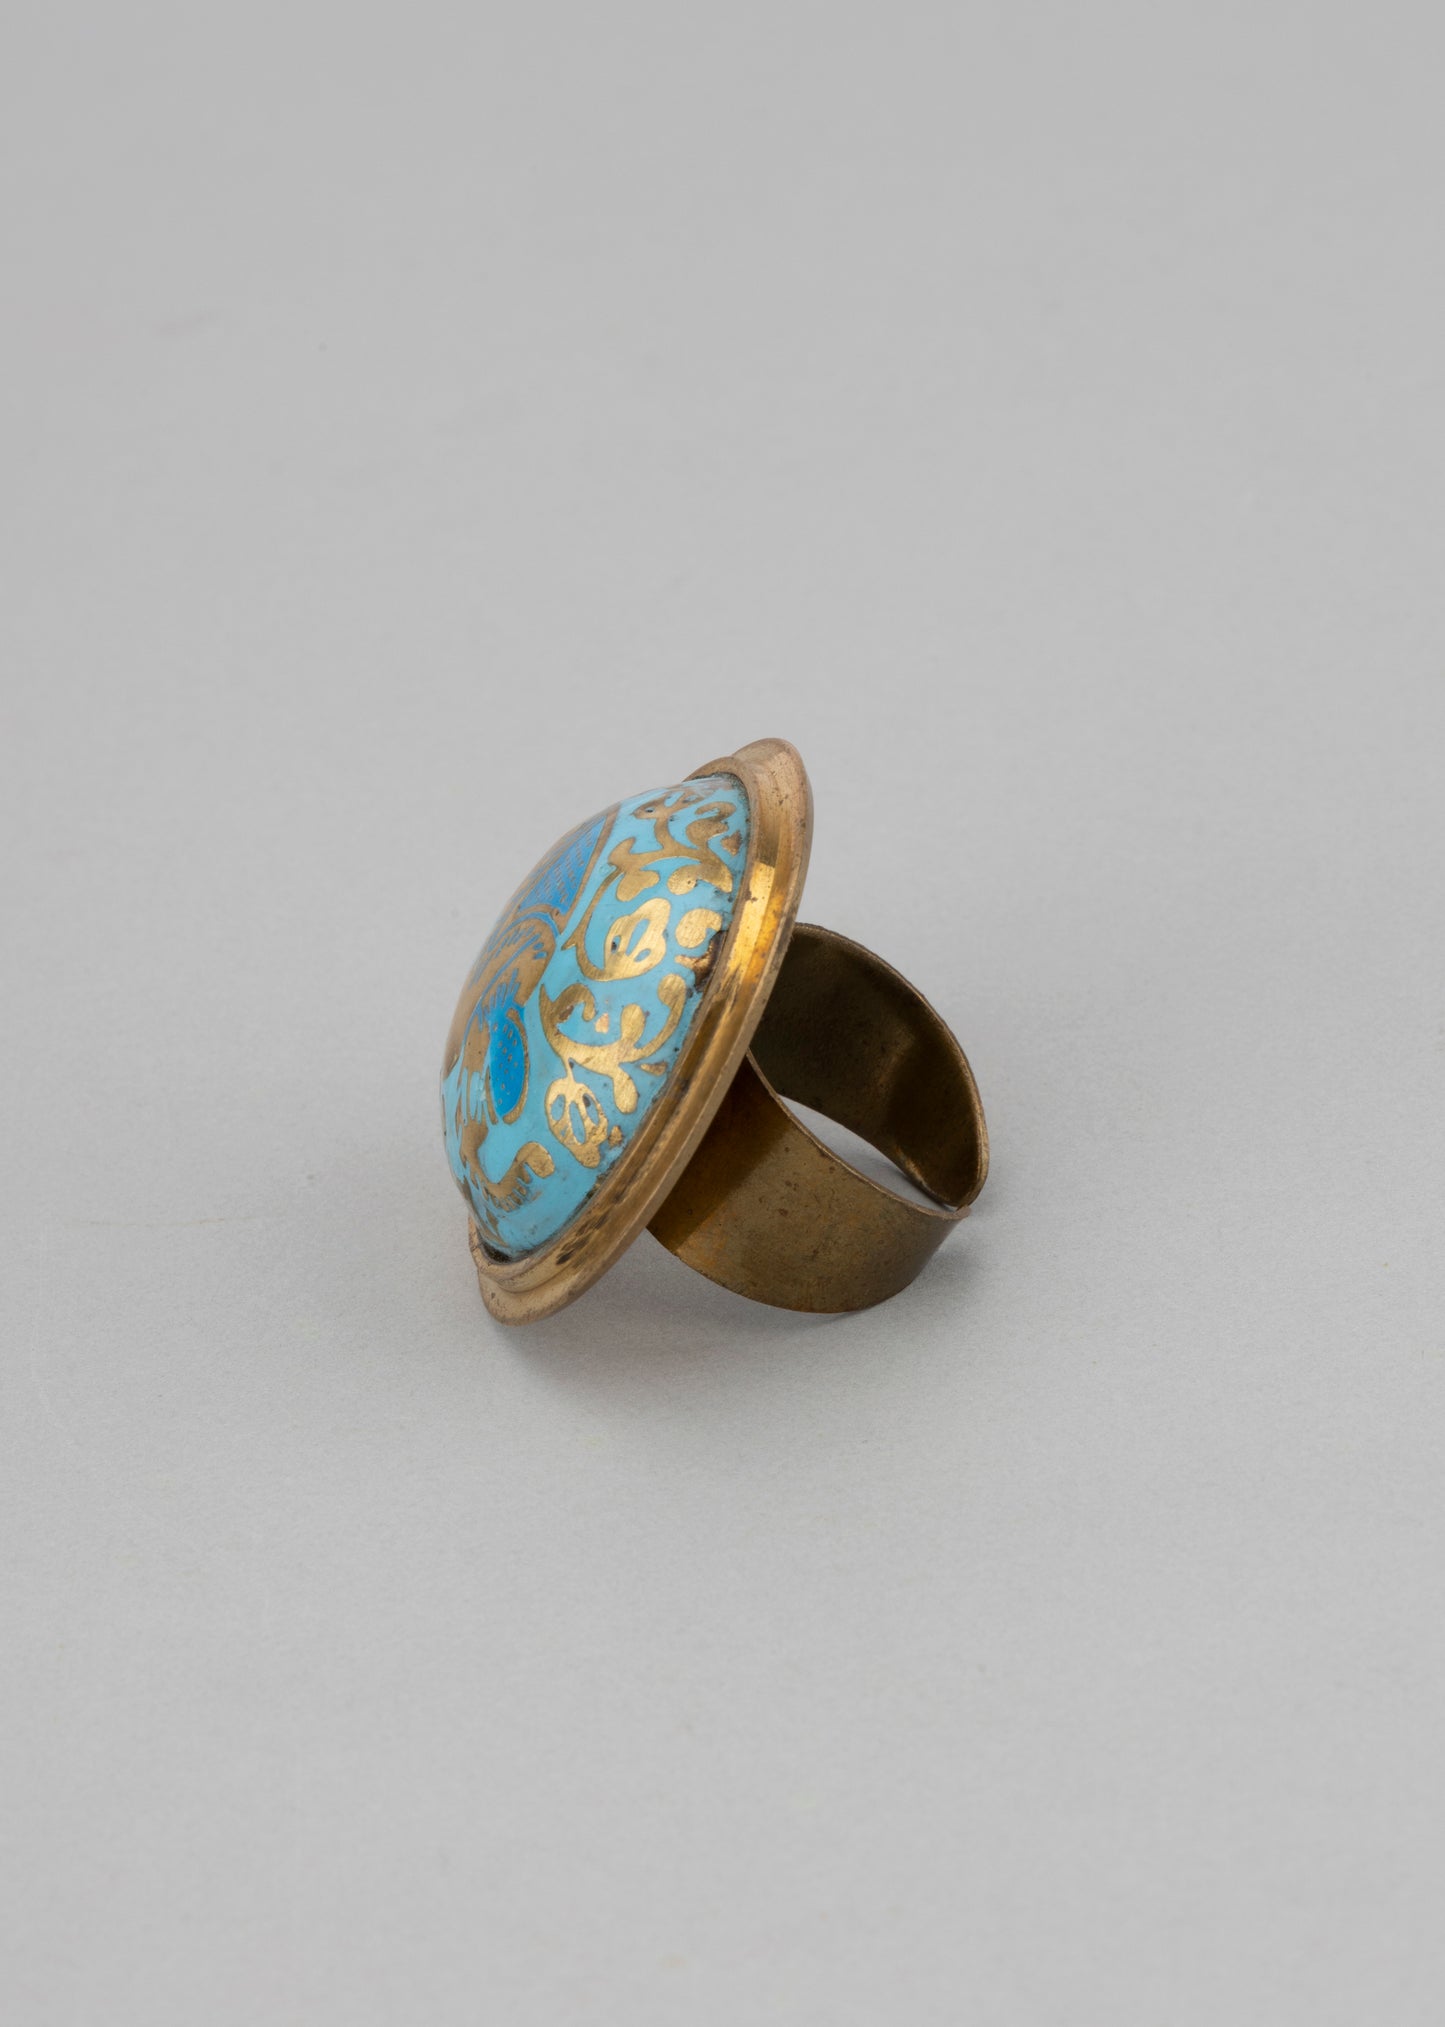 Adjustable Gold Plated-Blue Stone Ring